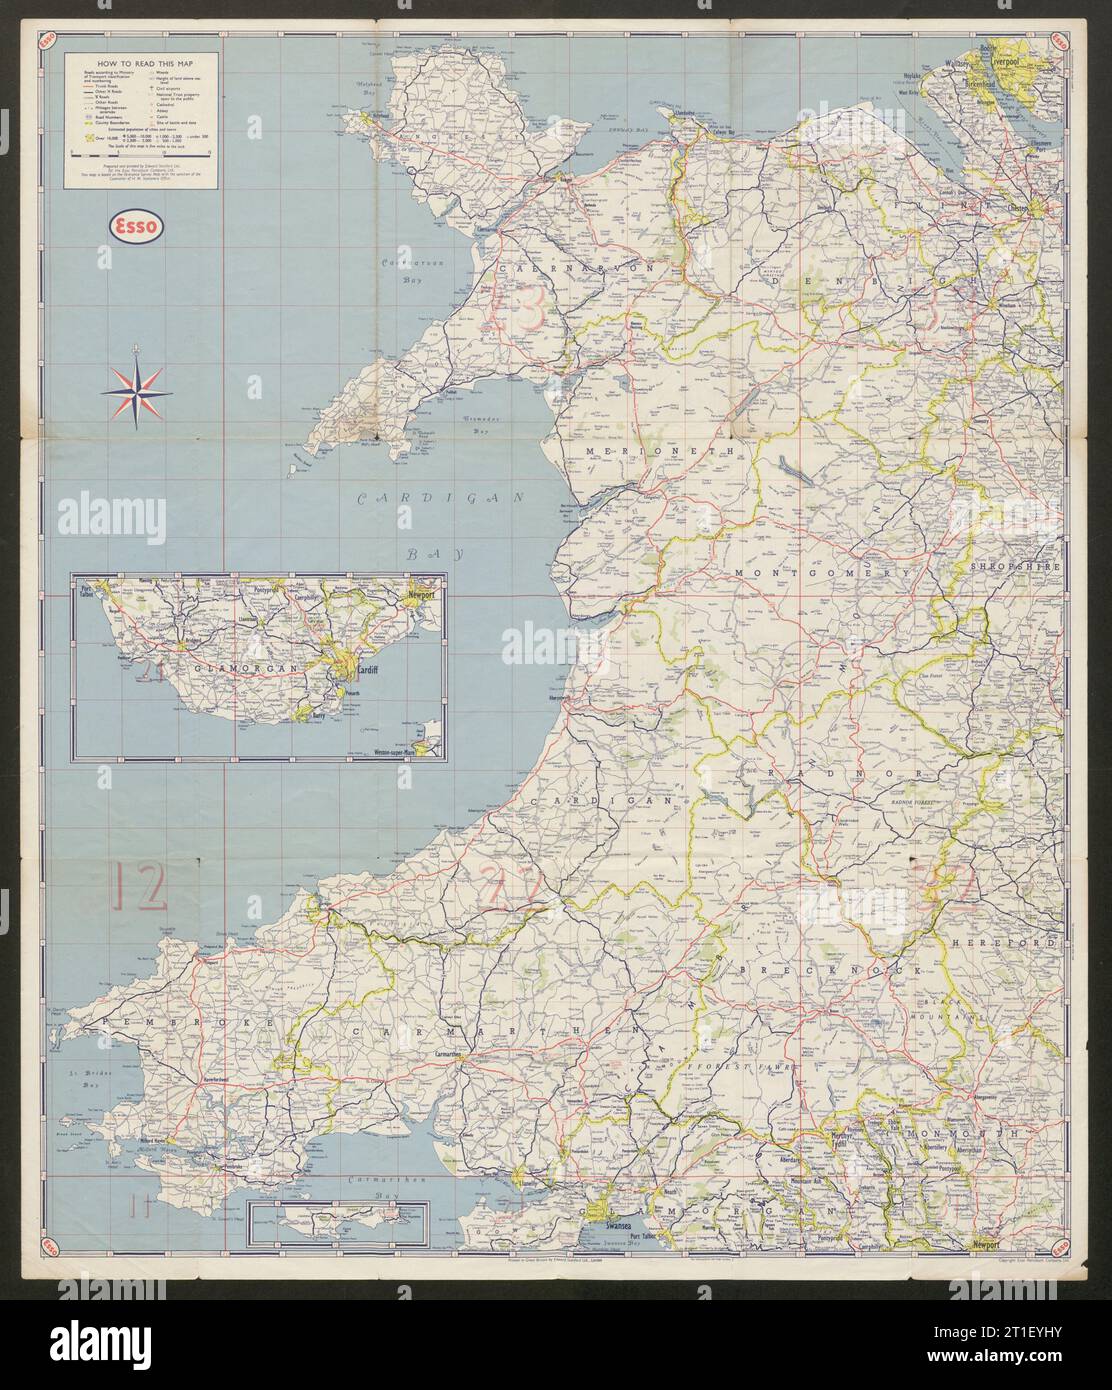 First Series Esso Road Map No 4 Wales and Midlands. ESSO c1950 old vintage Stock Photo